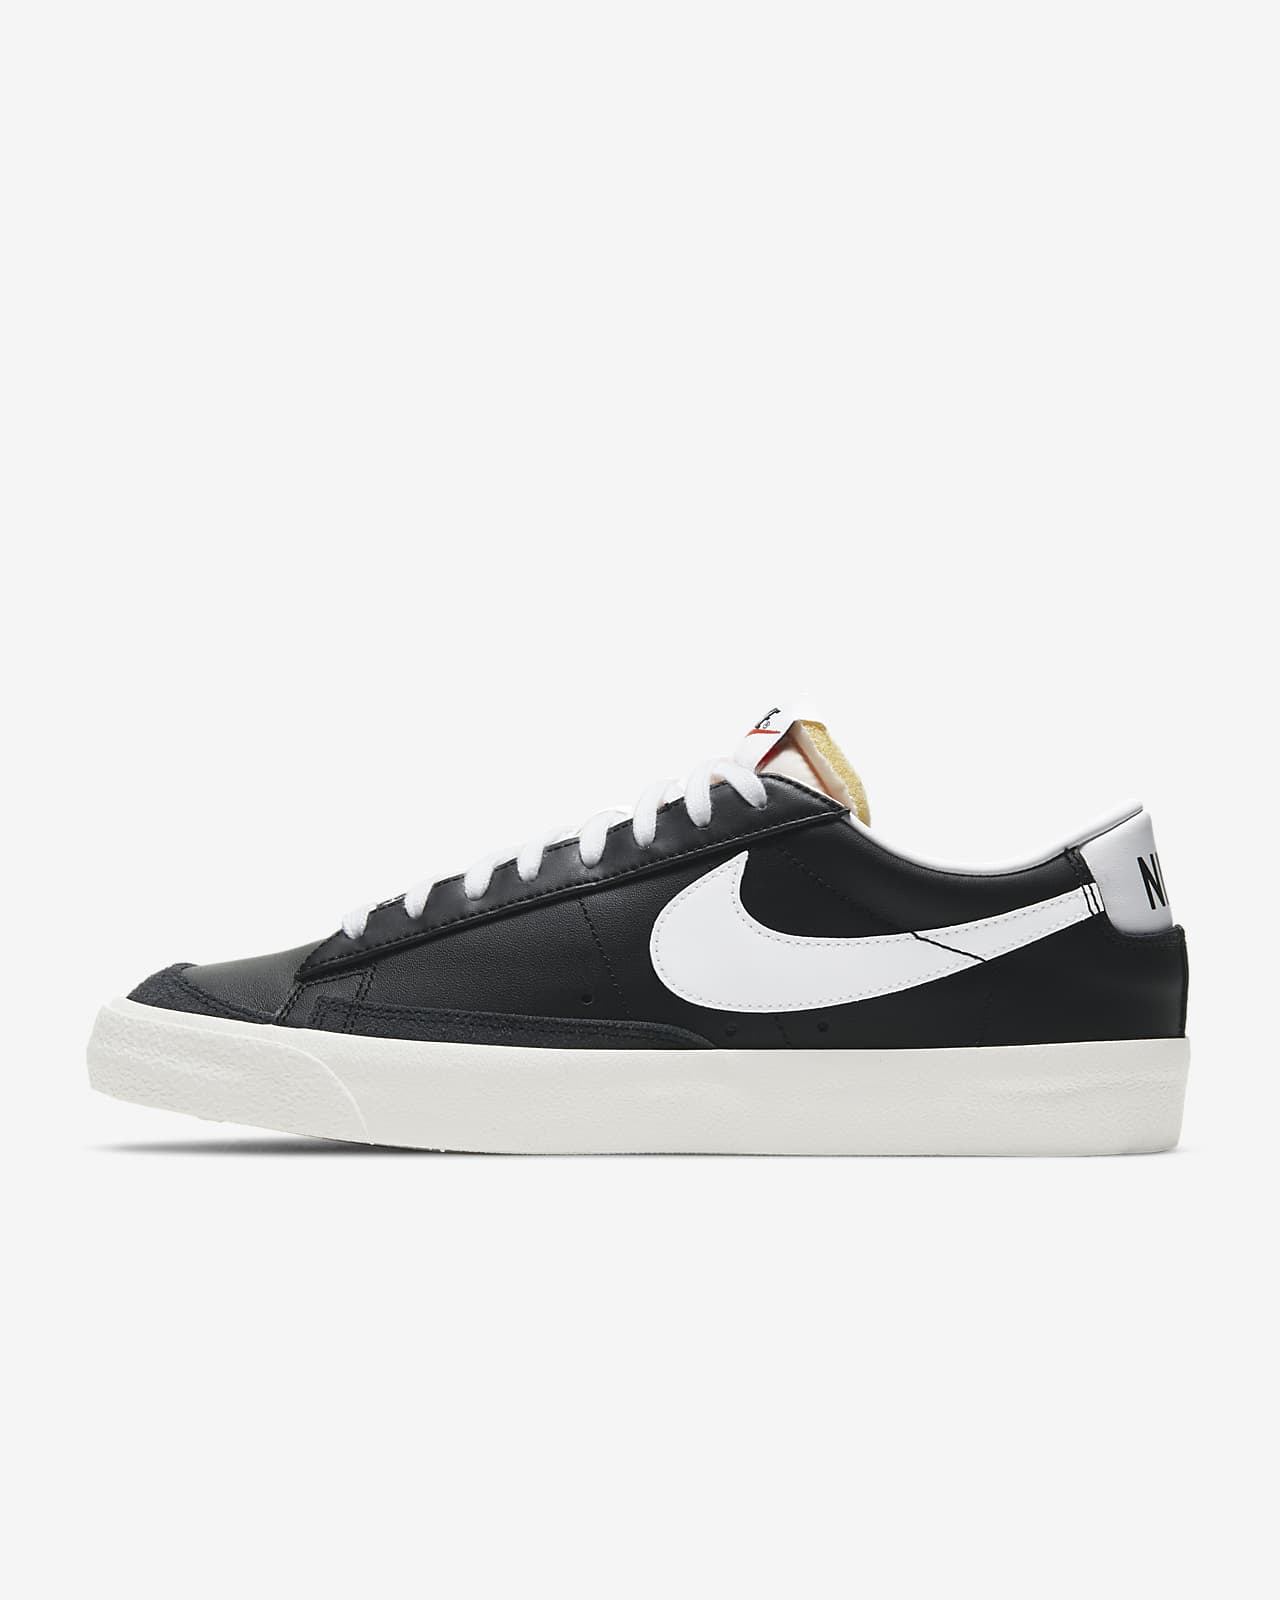 Chaussure Nike Blazer Low 77 Vintage Pour Homme Nike Fr